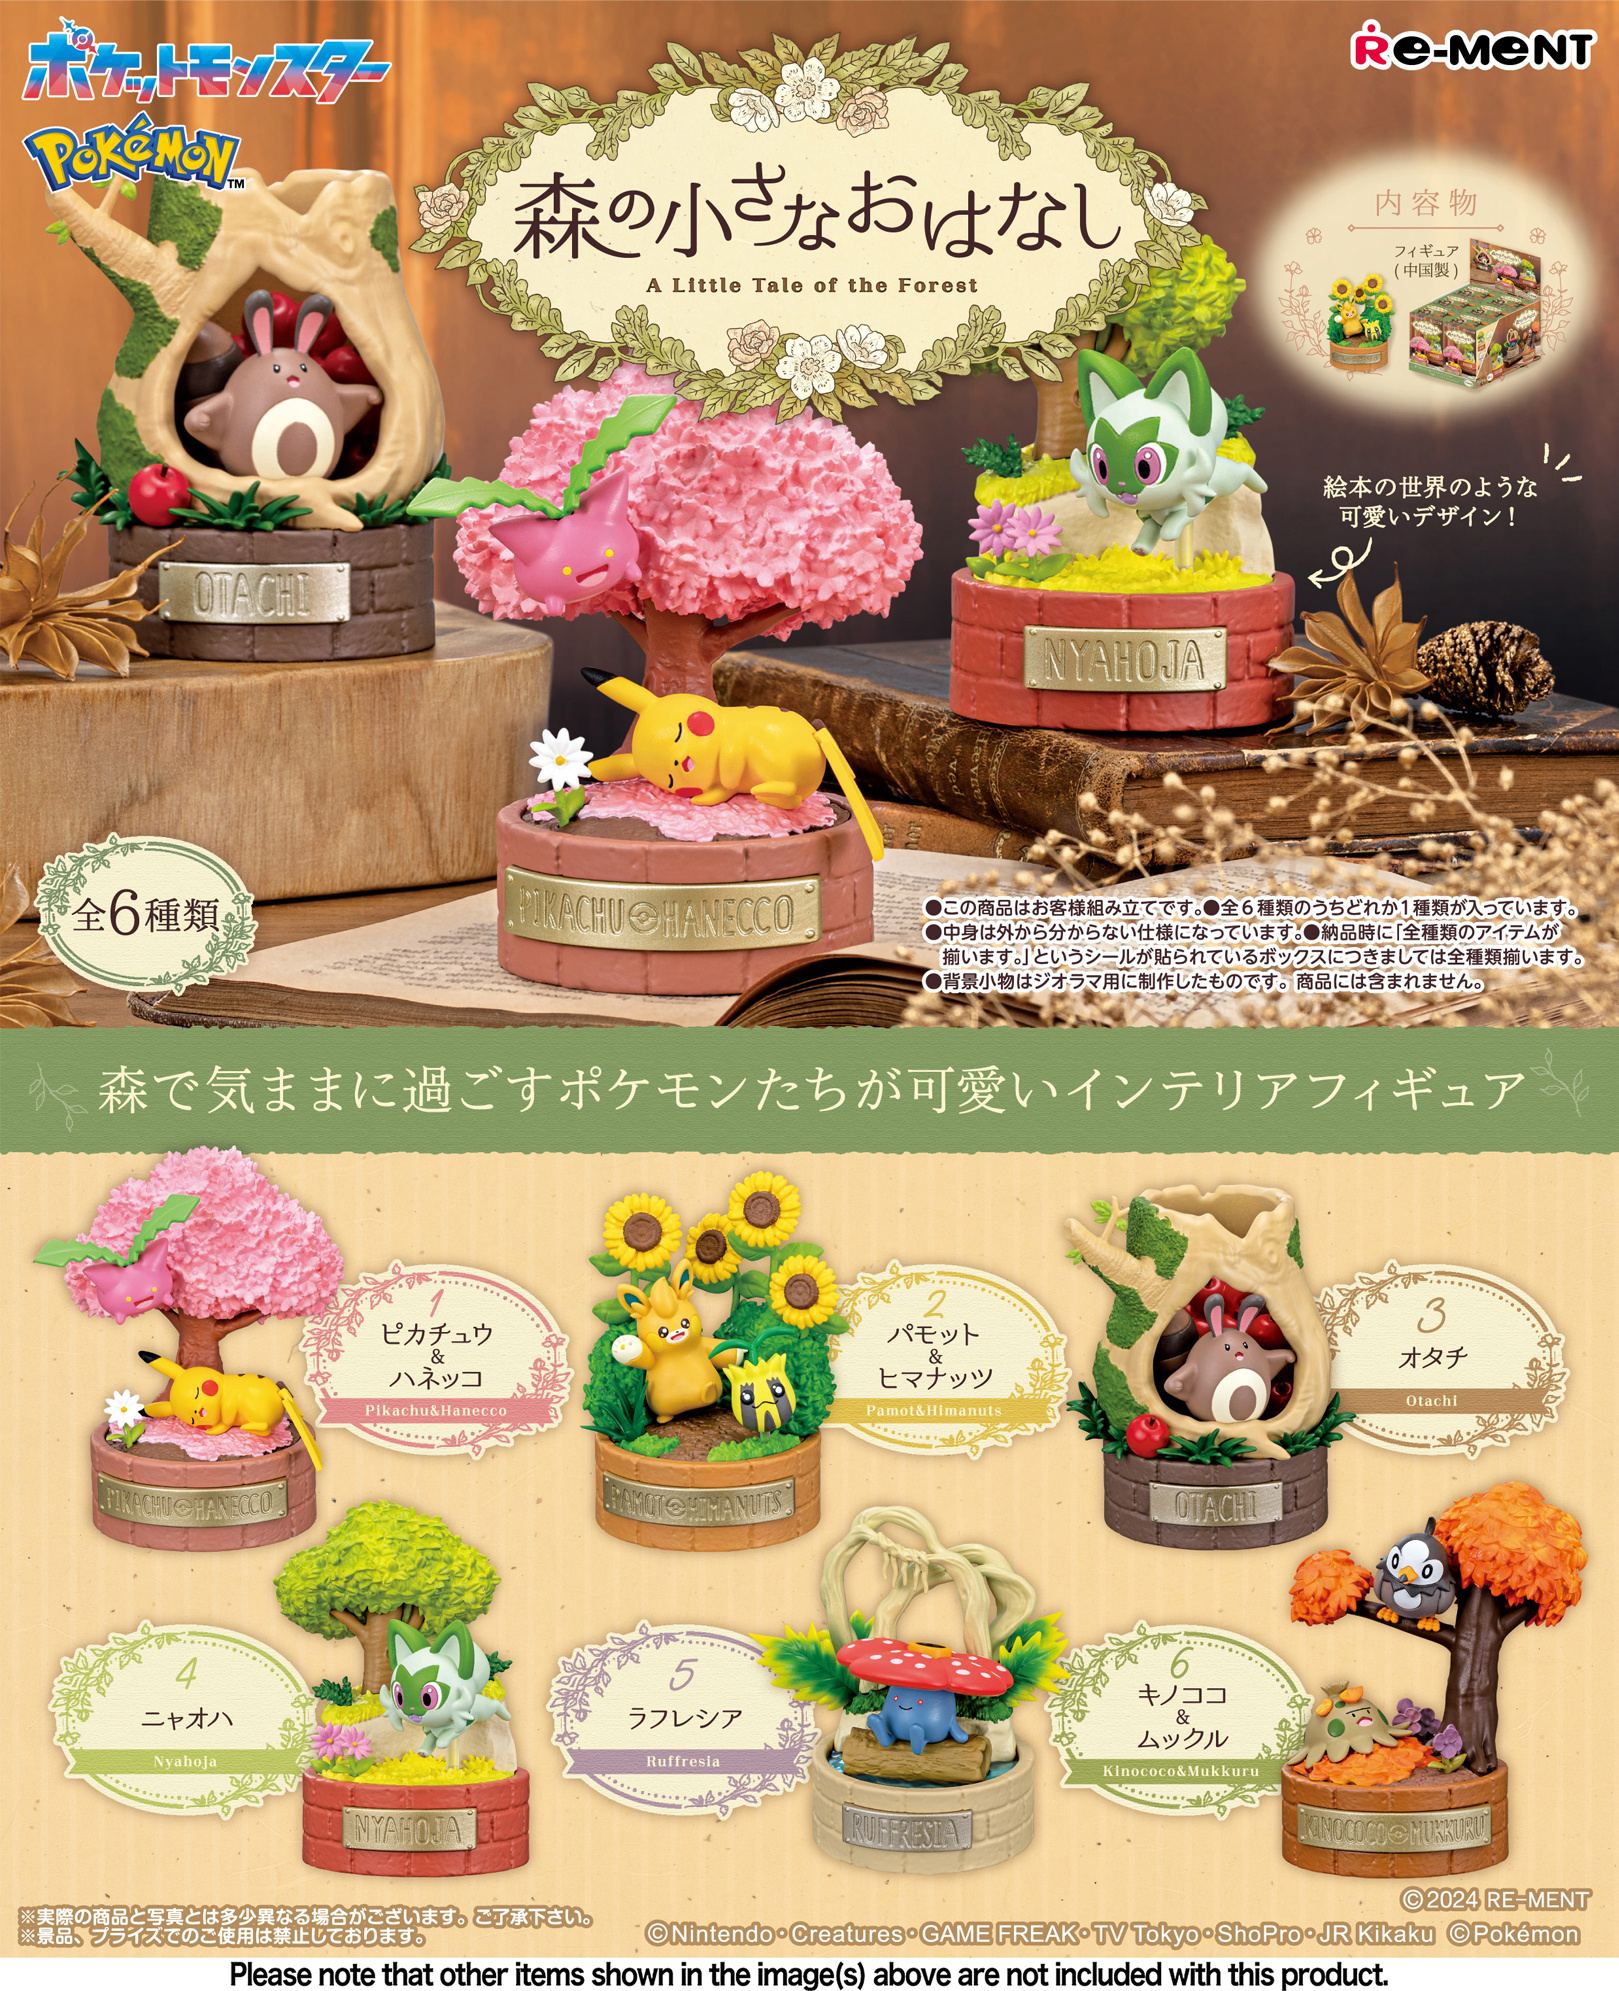 Pokemon A Little Tale of the Forest (Set of 6 Pieces) Re-ment